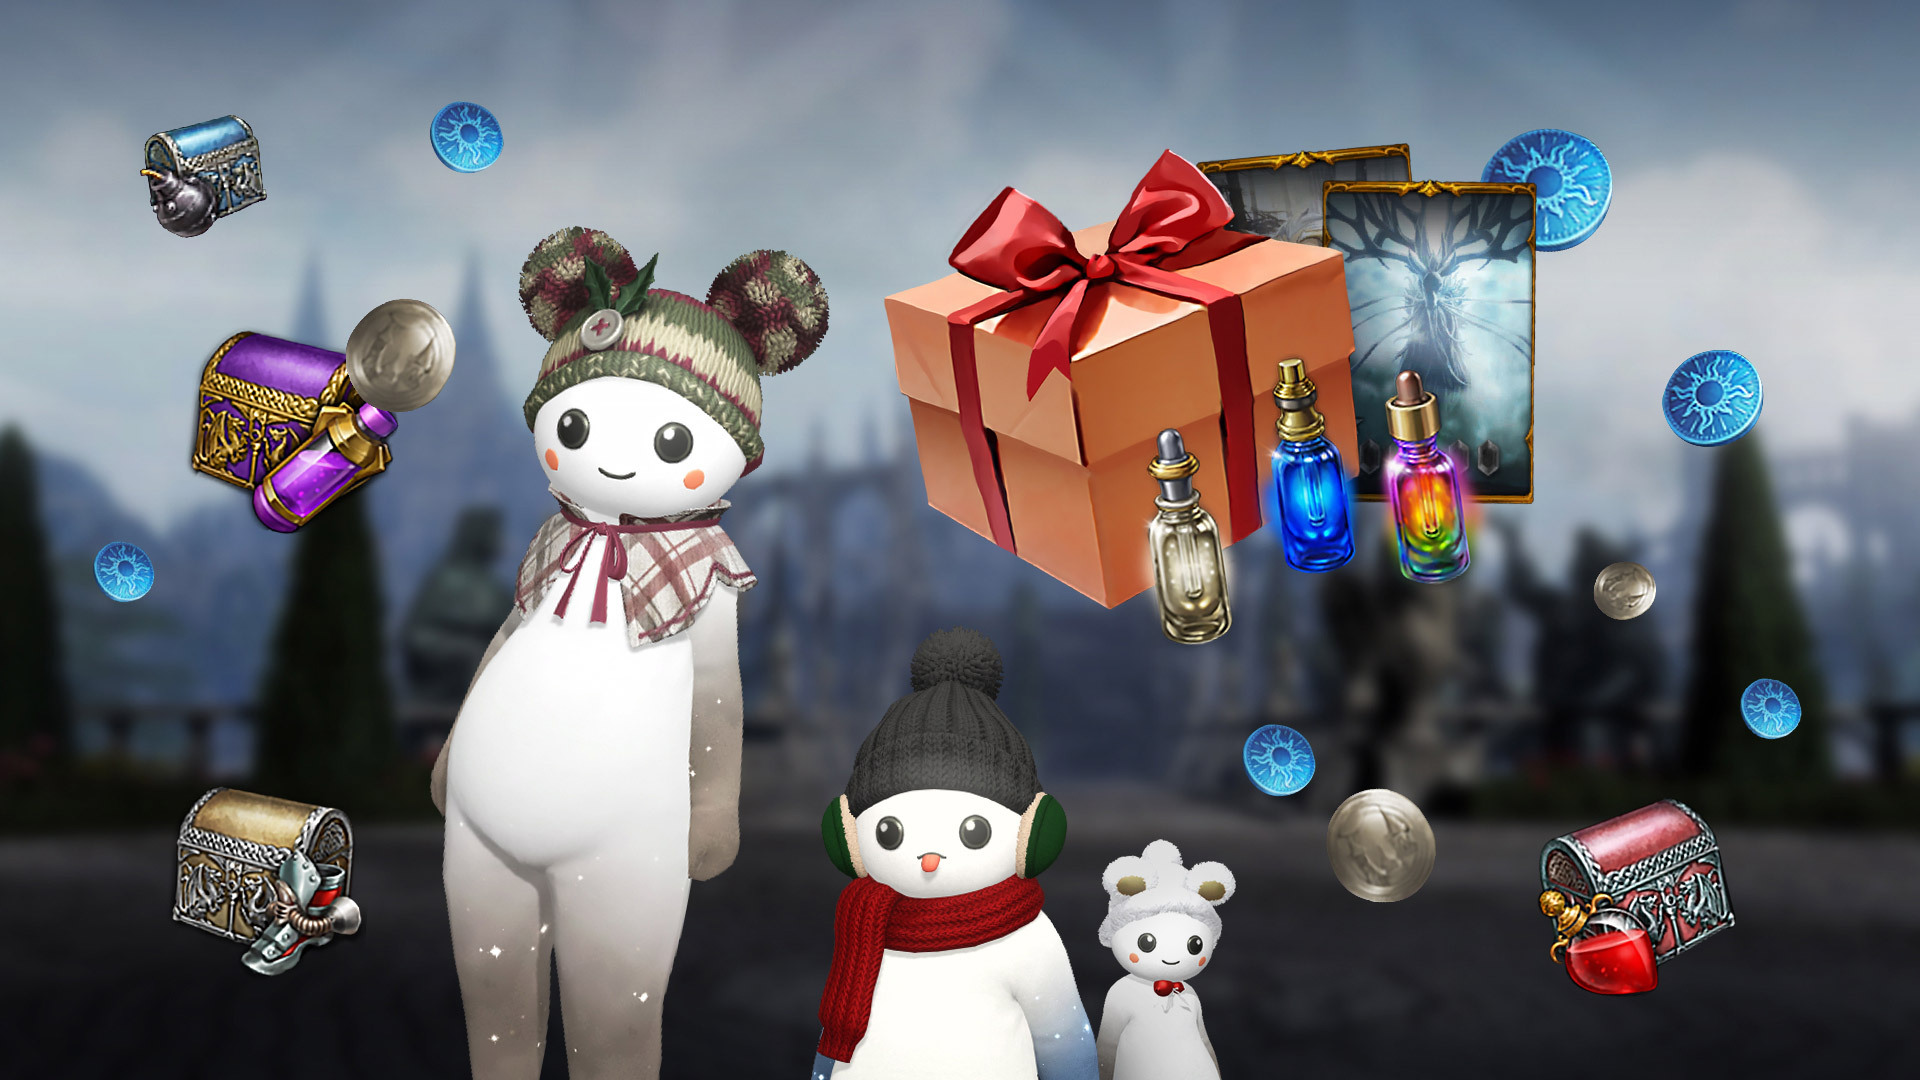 Lost Ark Developers Give Out Extra Freebies to Make Up for Unpopular Holiday Gift Item